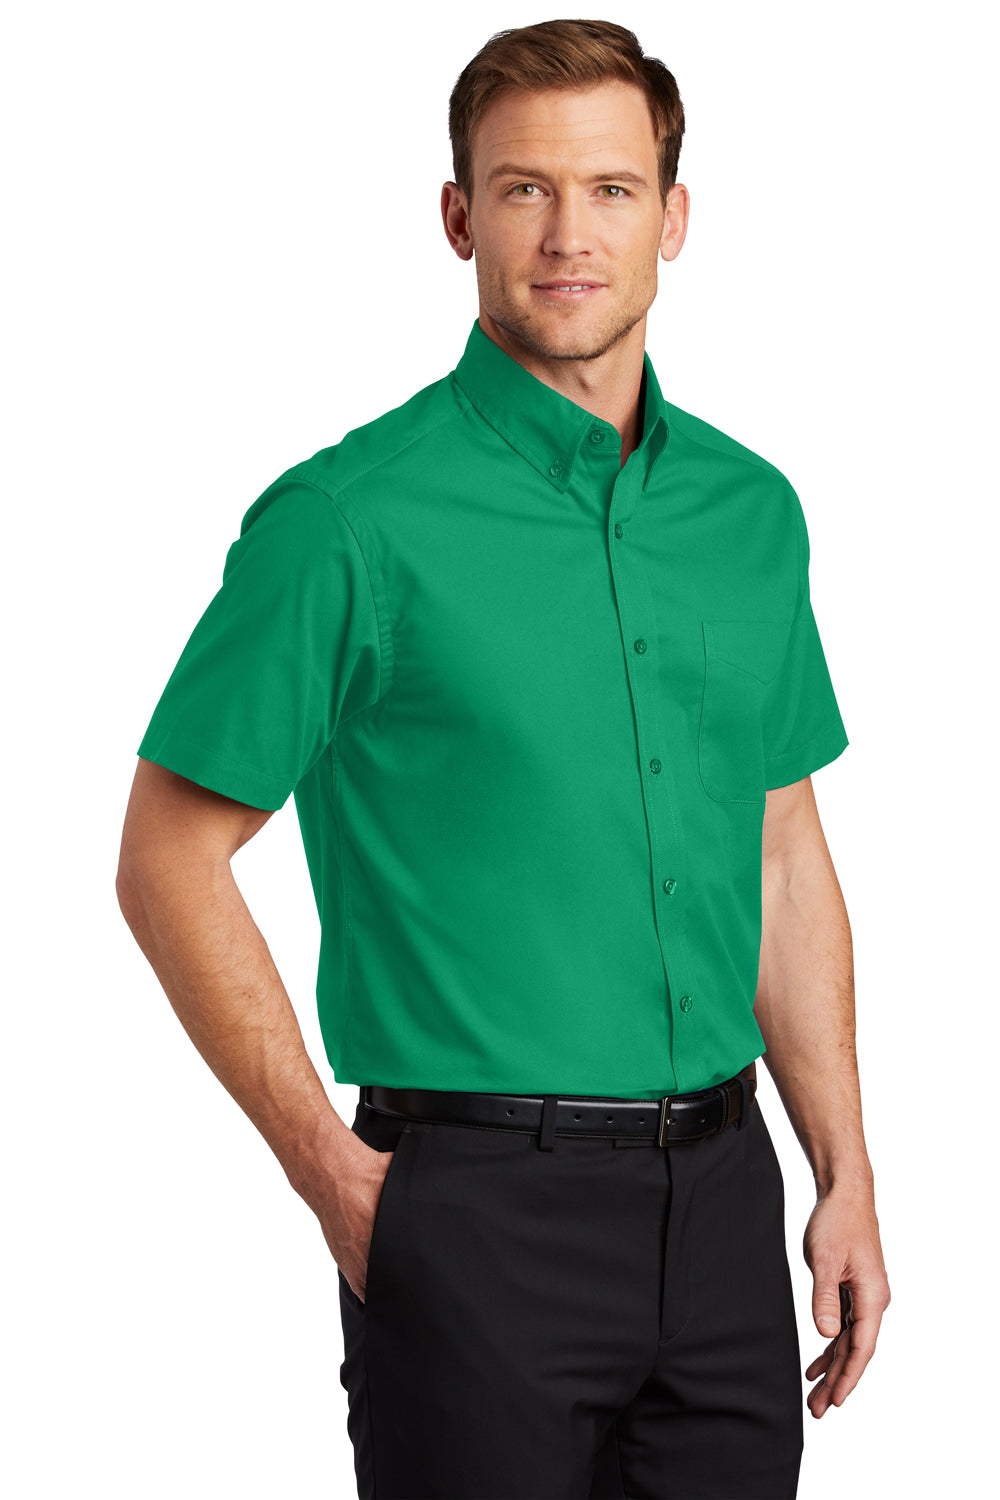 Port Authority S508/TLS508 Mens Easy Care Wrinkle Resistant Short Sleeve Button Down Shirt w/ Pocket Court Green 3Q